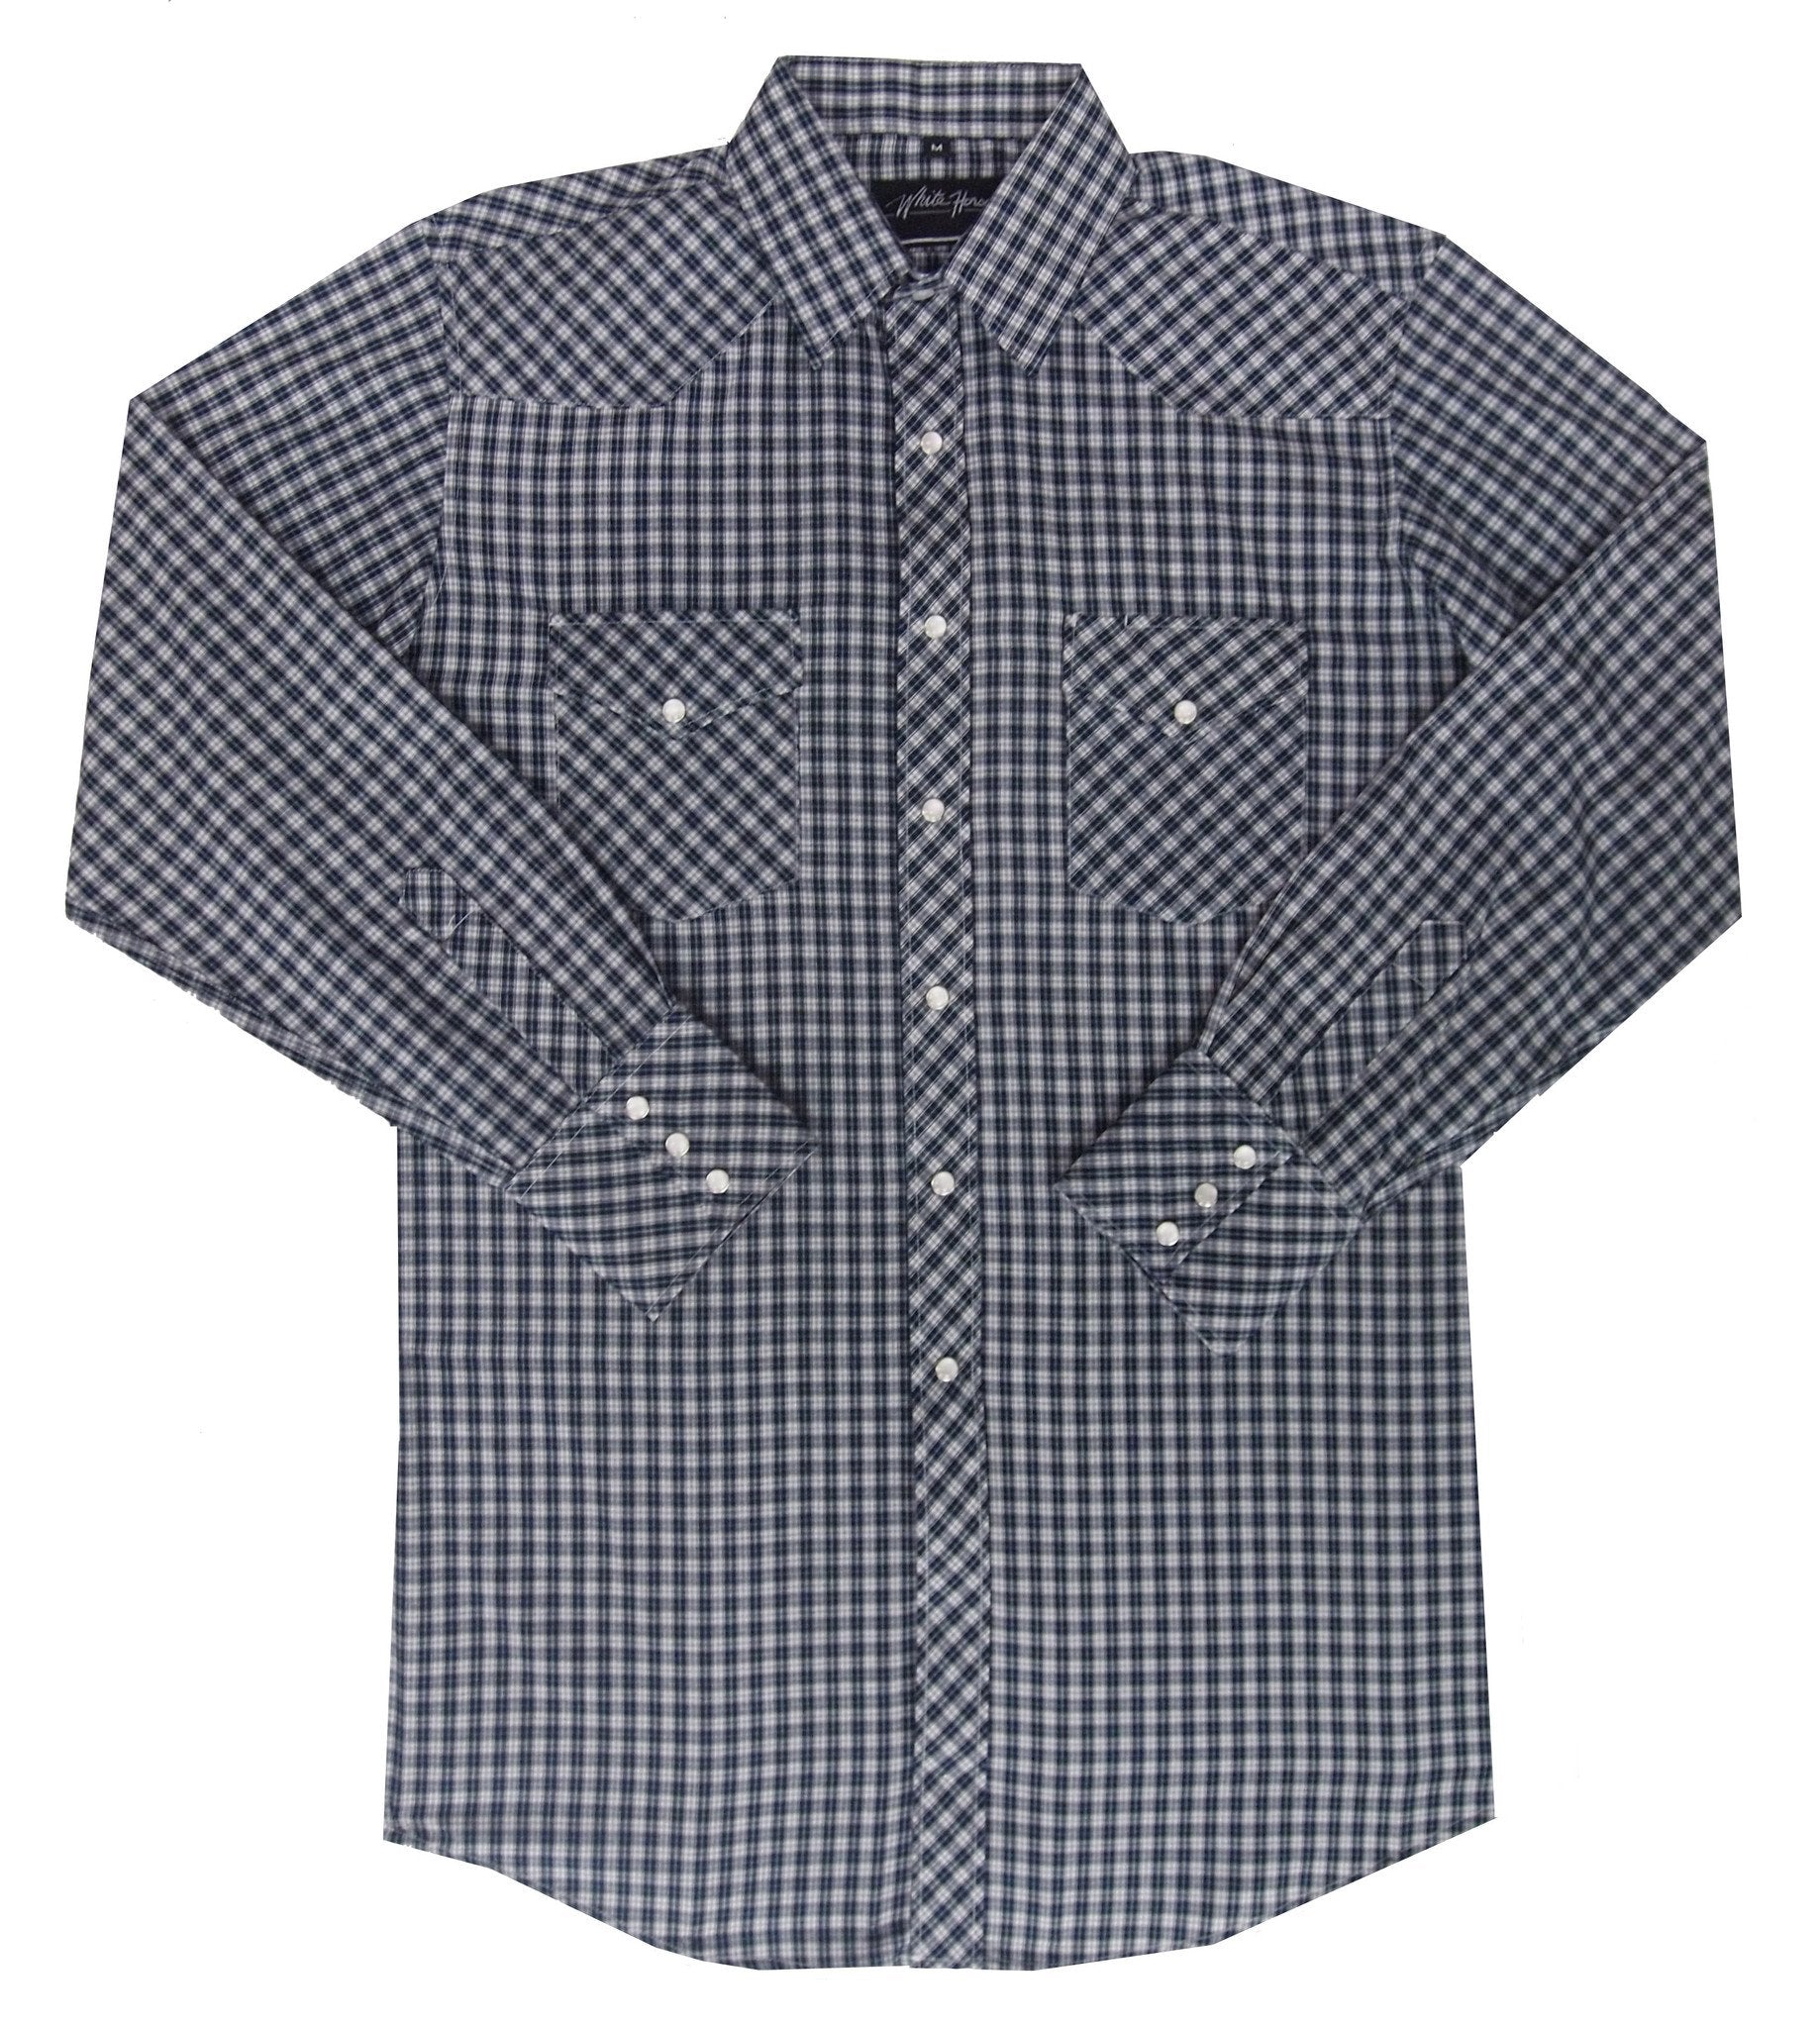 White Horse Apparel Men's Western Plaid Navy and White